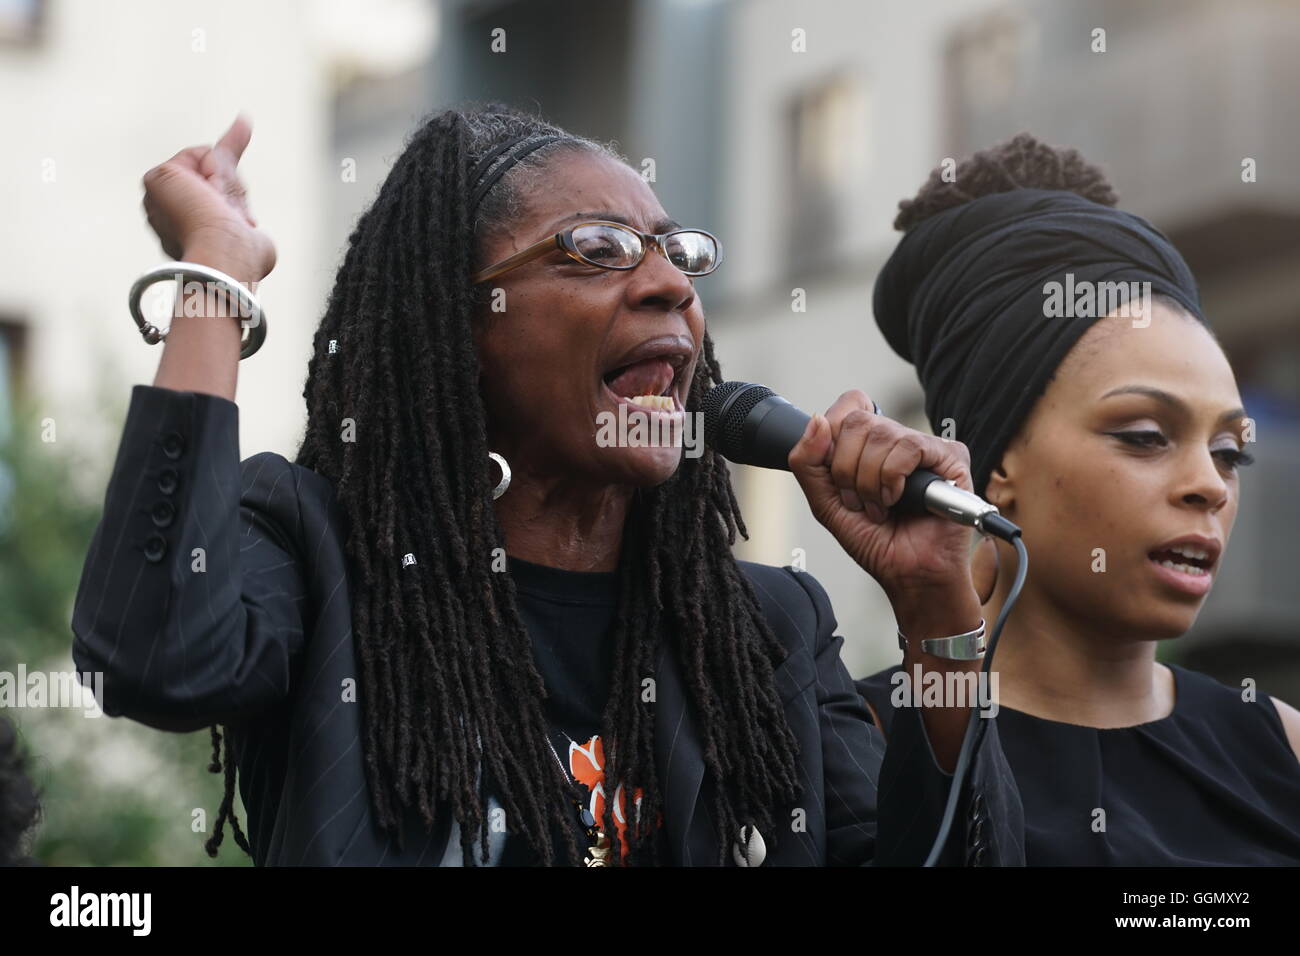 London, England, UK. 5th Aug, 2016. Speaker Marcia Rigg sister of Sean Rigg kill by police protest Black Lives Matter continue demand justce not revenge at Altab Ali Park, East London, UK. Credit:  See Li/Alamy Live News Stock Photo